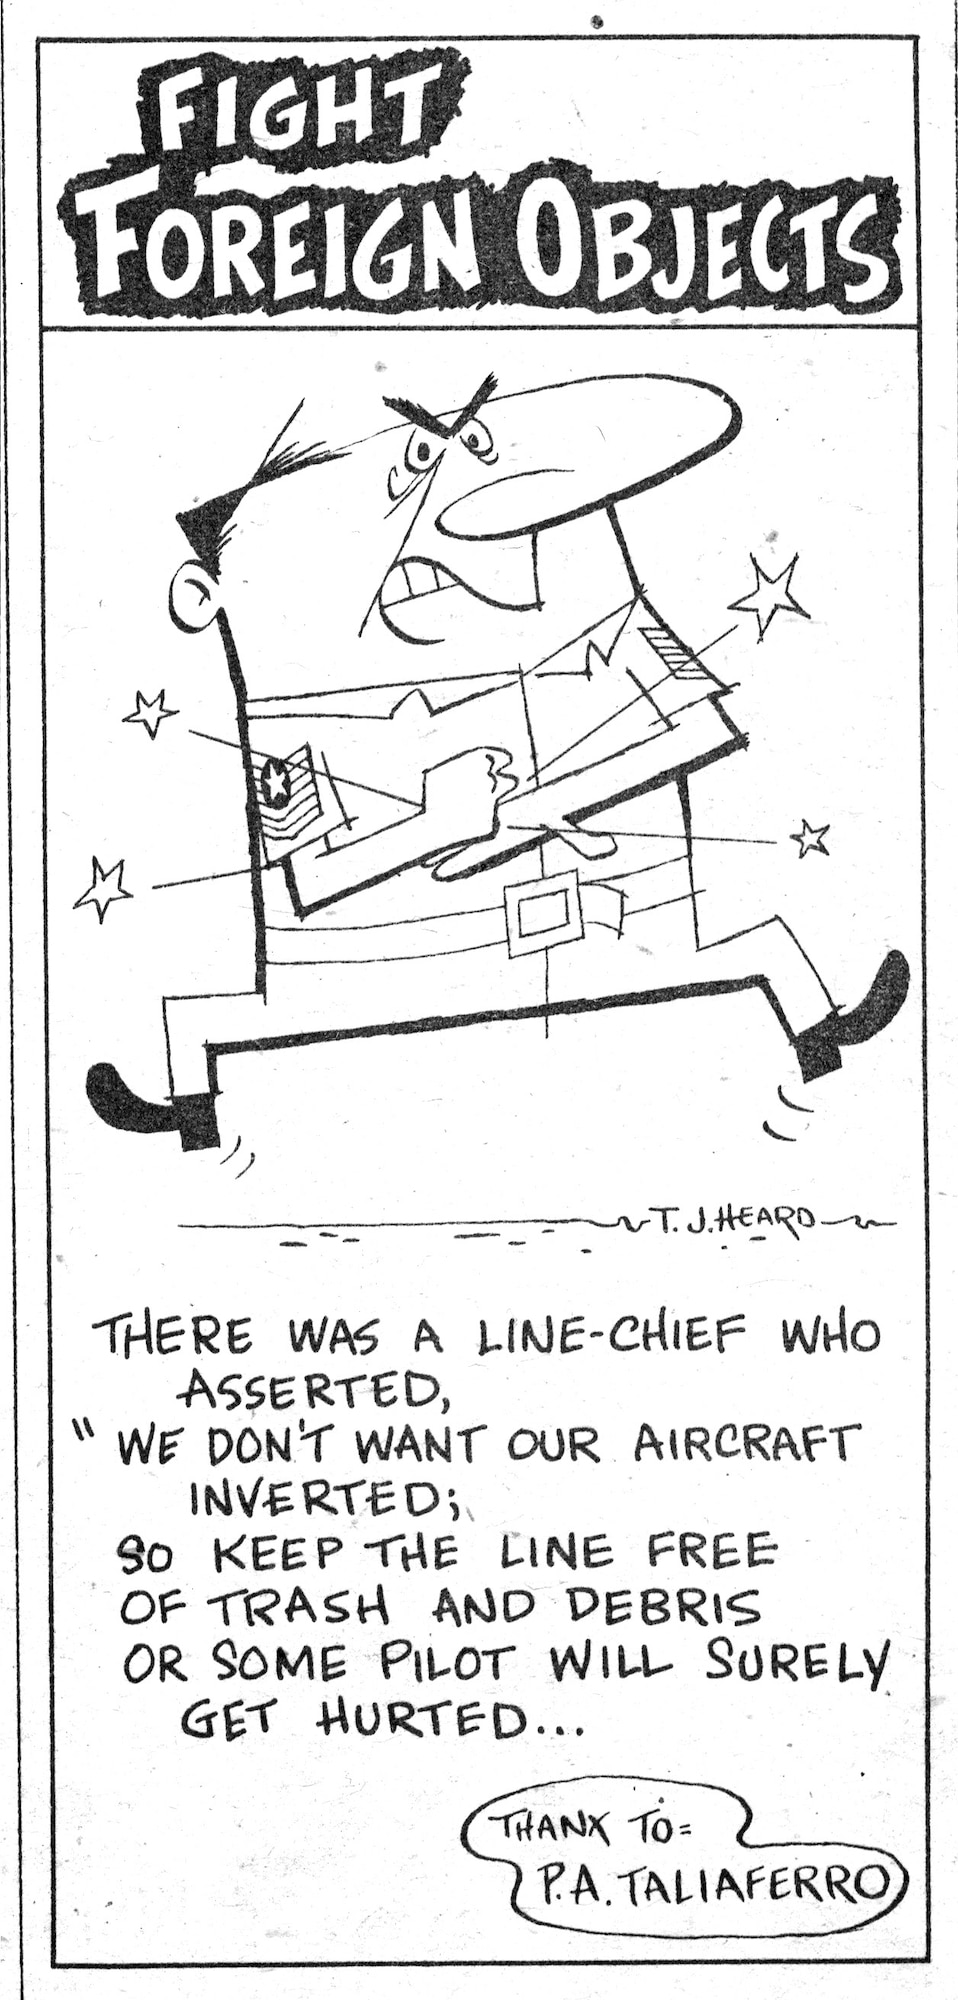 To raise the awareness of FOD and its consequences Andersen’s base newspaper Tropic Topics ran a series of anti-FOD limerick-based comic strips such as this one which was originally published on Nov. 23, 1956. 